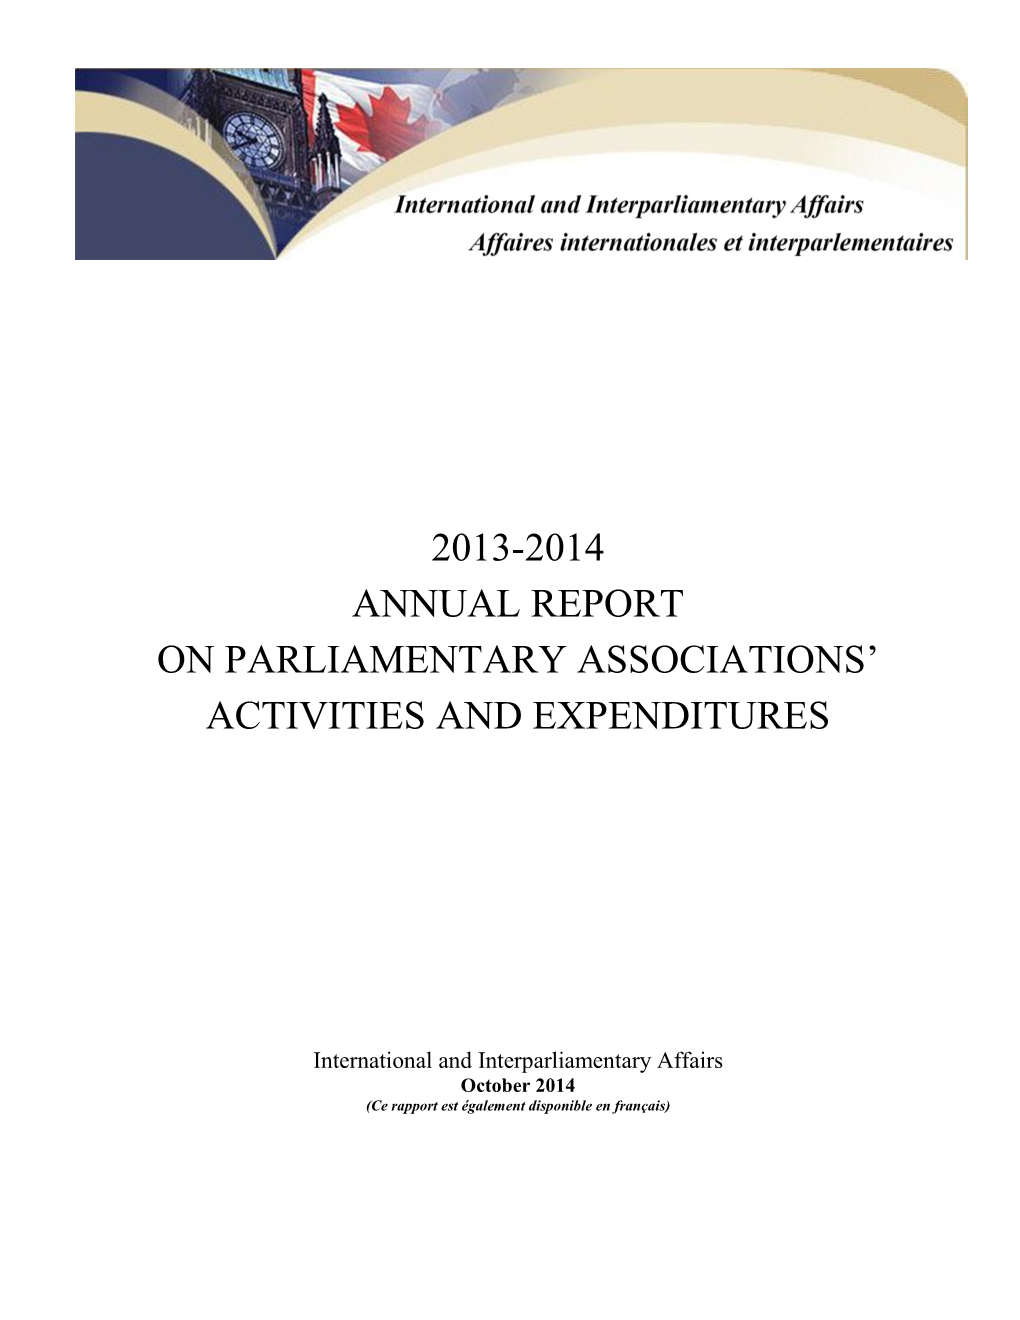 2013-2014 Annual Report on Parliamentary Associations’ Activities and Expenditures